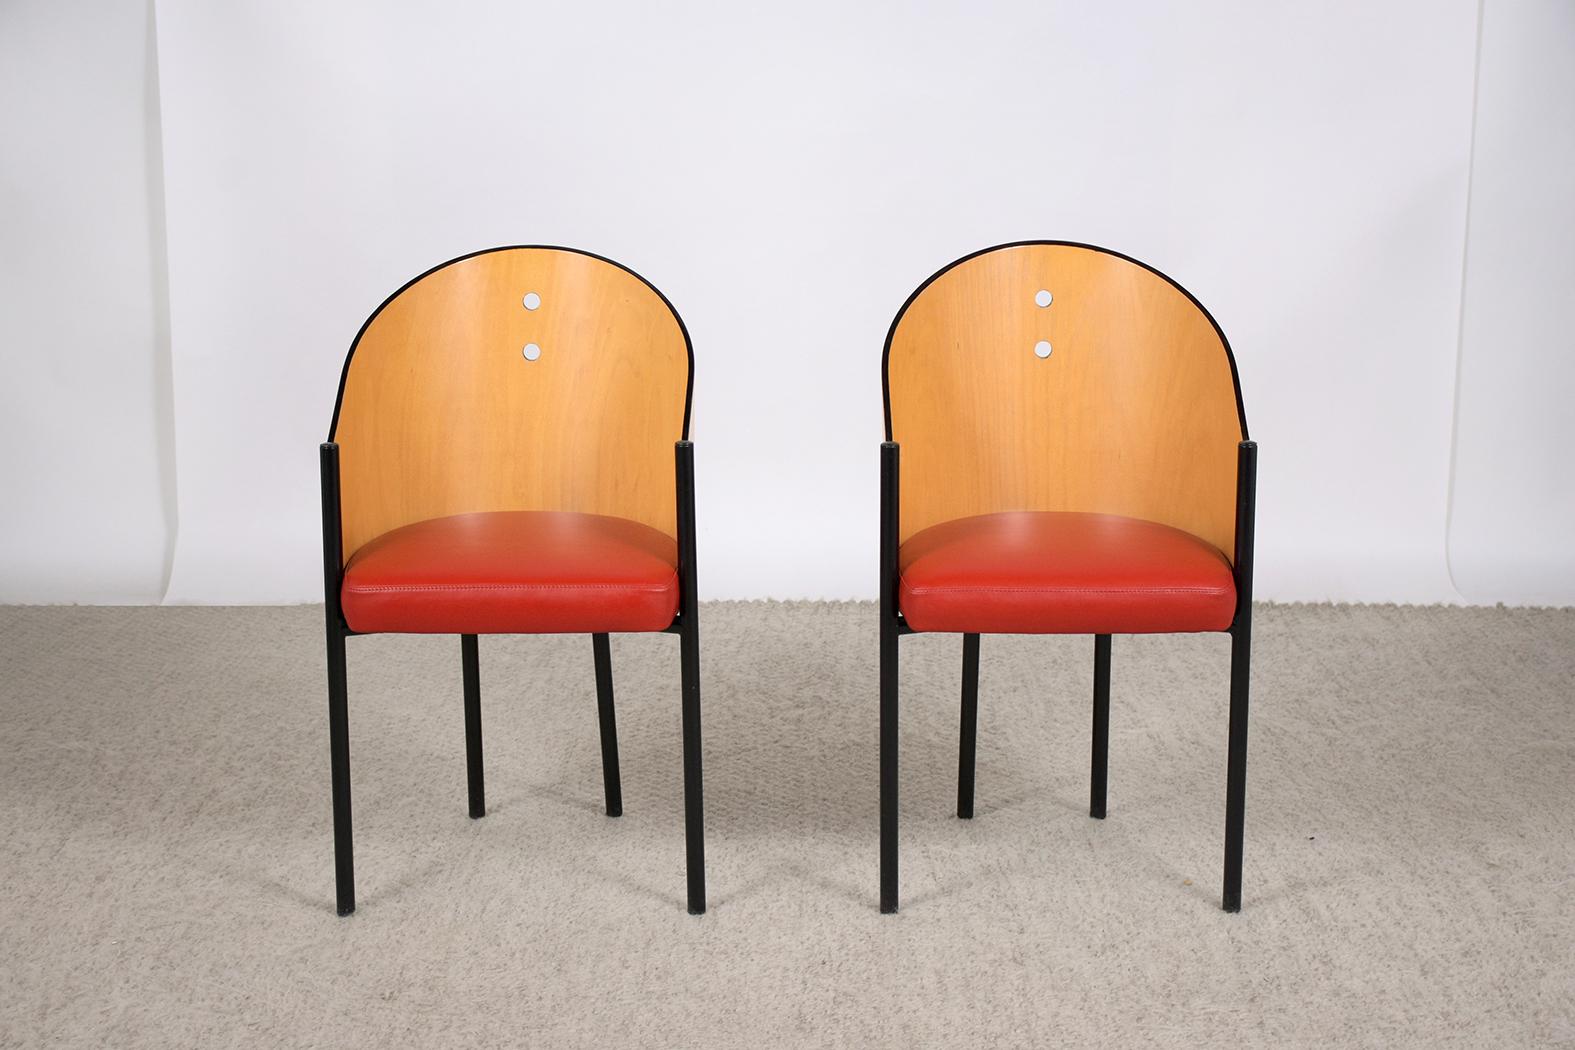 Stained Vintage Mid-Century Dining Chairs: Elegance in Barrel Back Design For Sale